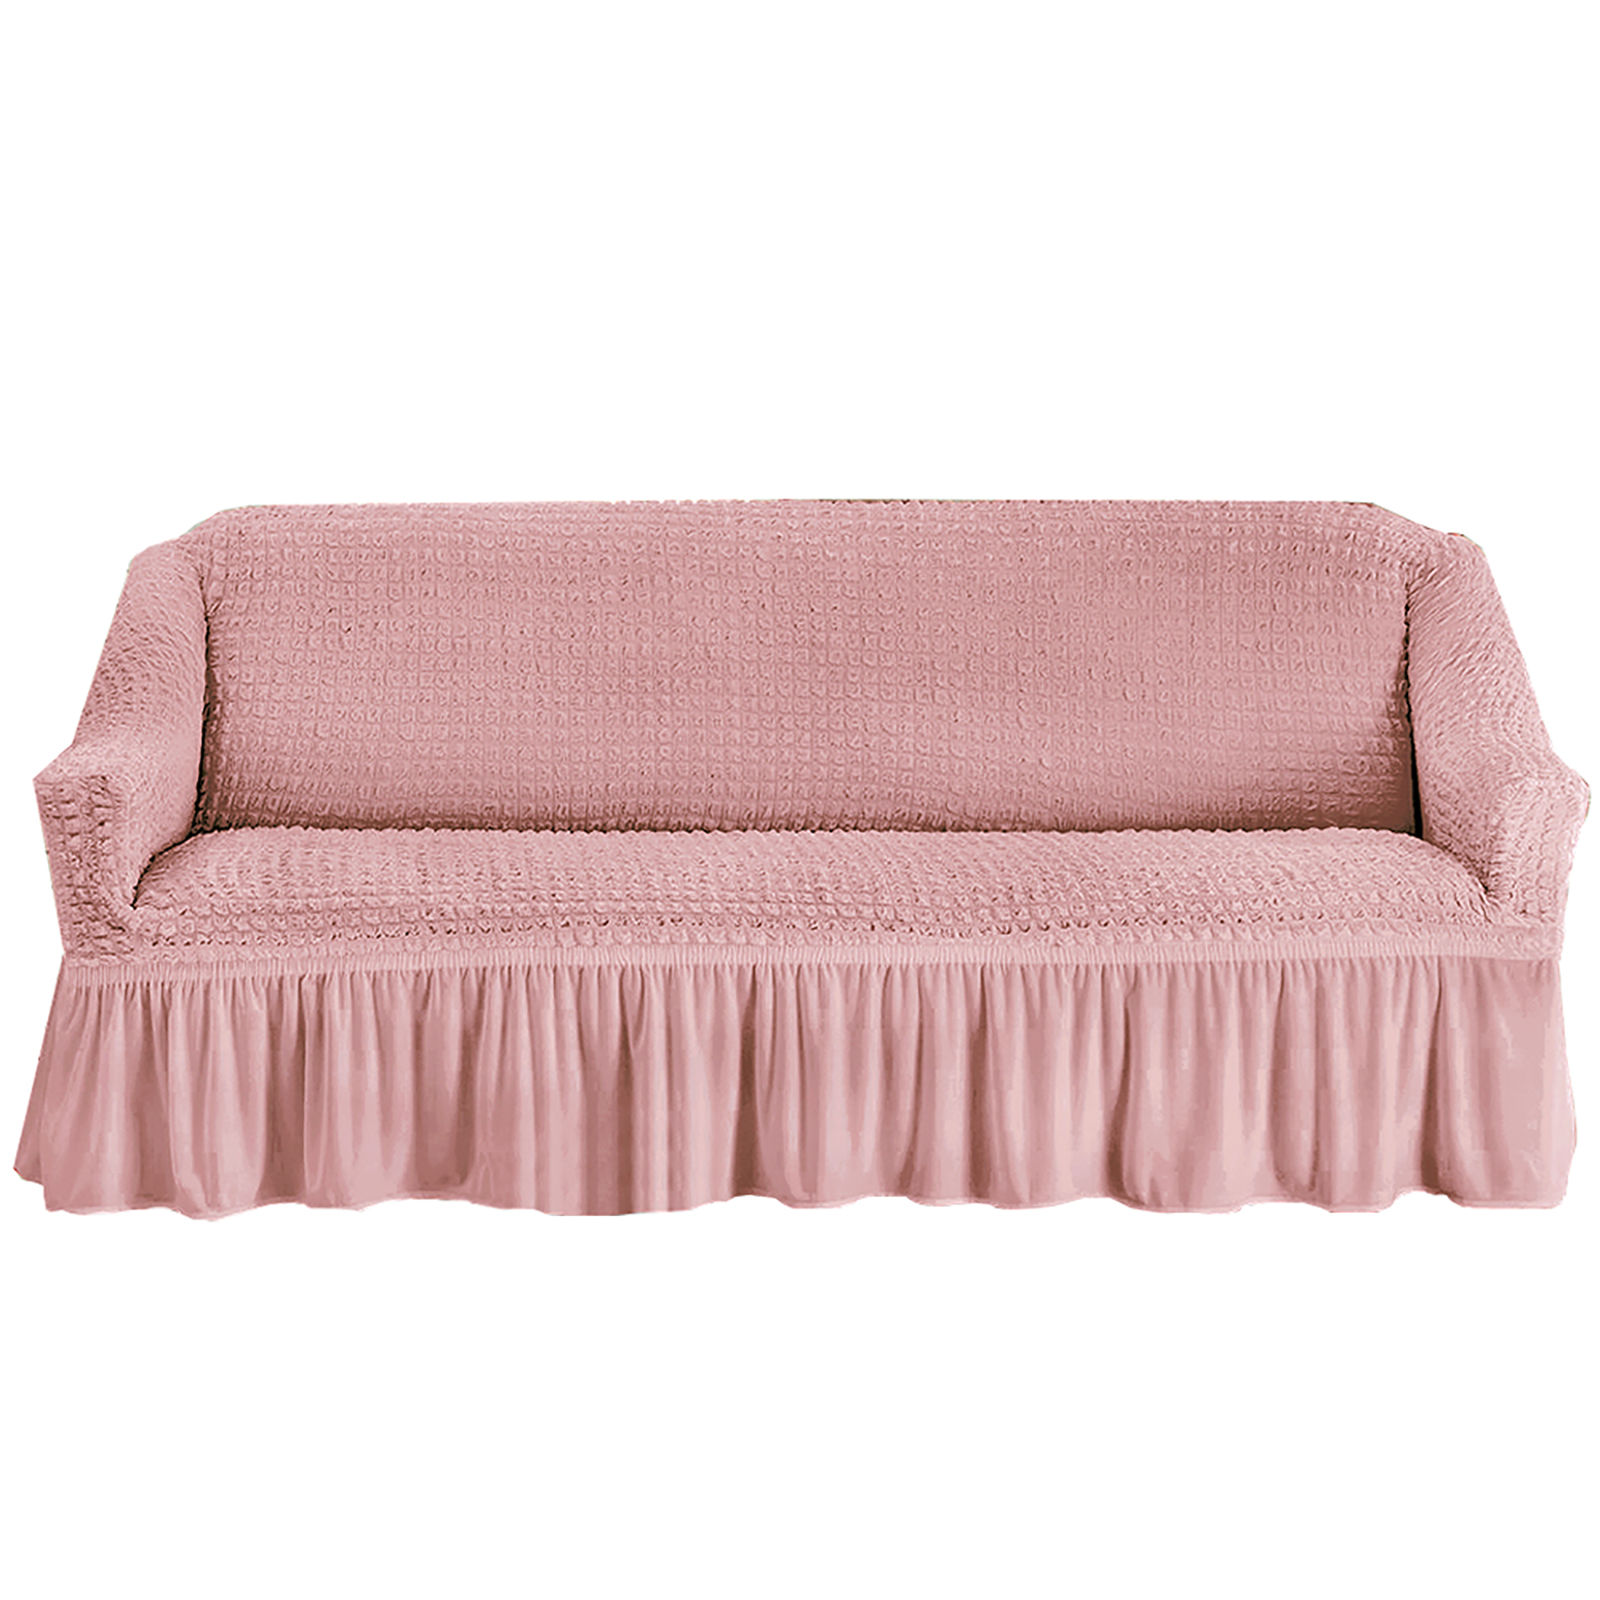 Stretch Sofa Slipcover, 3 Seater Sofa Slipcovers With Skirt With Armless Soft Sofa Cover Elastic Straps Sofa Slipcover For Living Room Kids Pets-Pink-Large